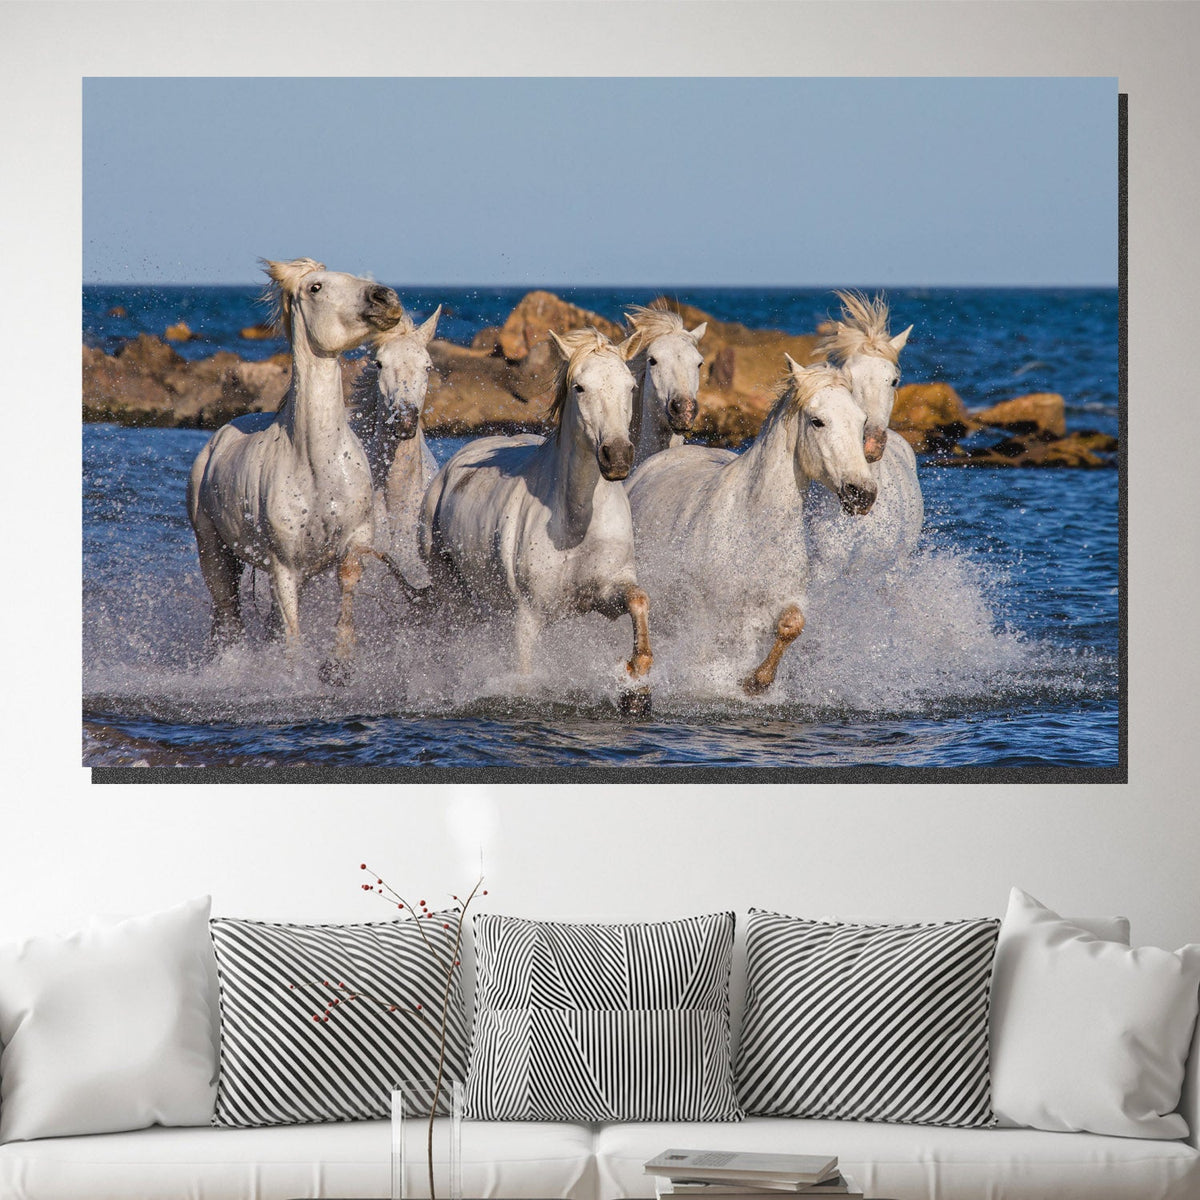 https://cdn.shopify.com/s/files/1/0387/9986/8044/products/WhiteCamargueHorsesCanvasArtprintStretched-3.jpg